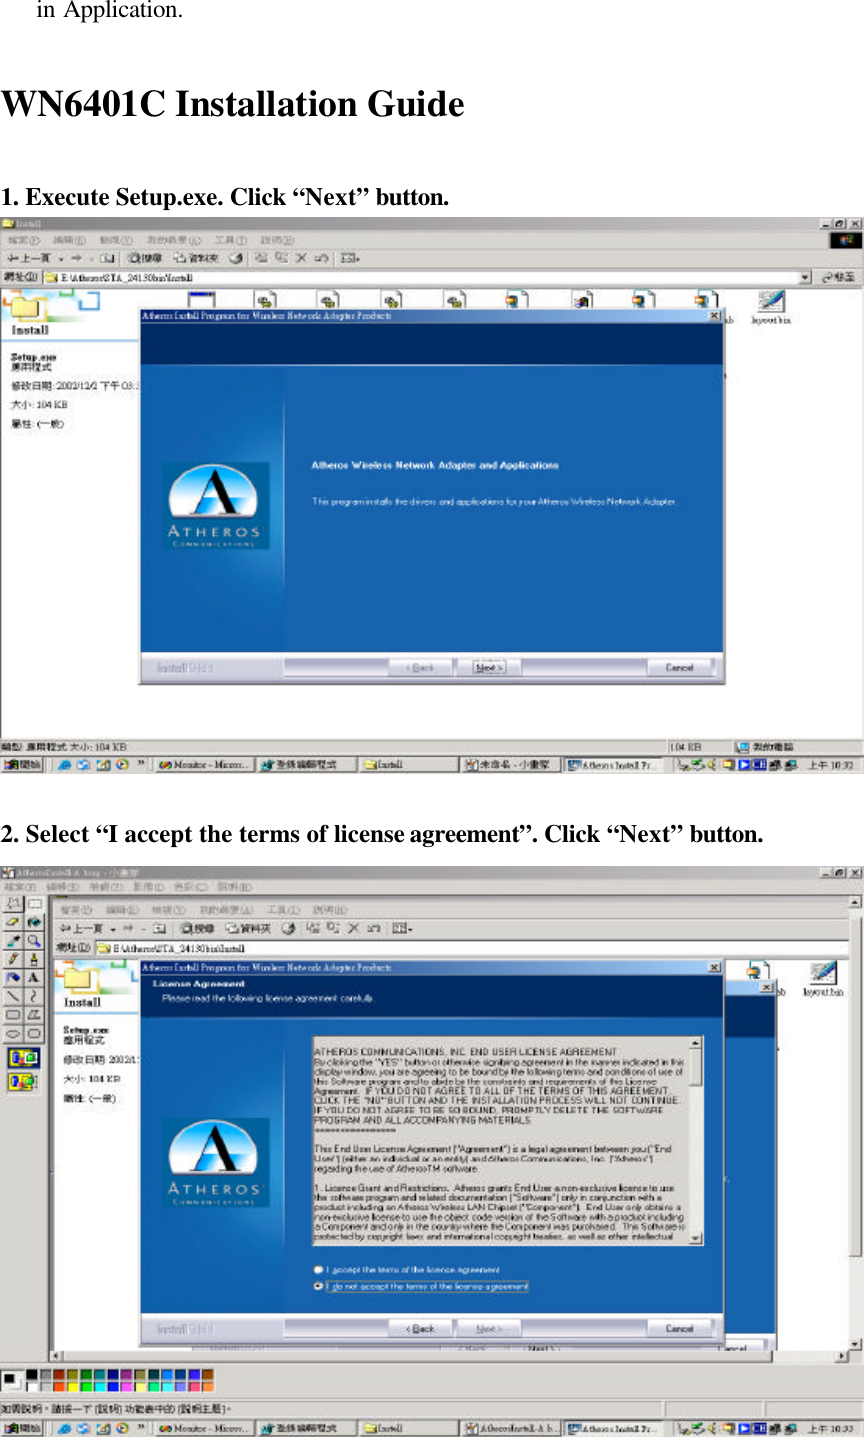 in Application.WN6401C Installation Guide1. Execute Setup.exe. Click “Next” button.2. Select “I accept the terms of license agreement”. Click “Next” button.